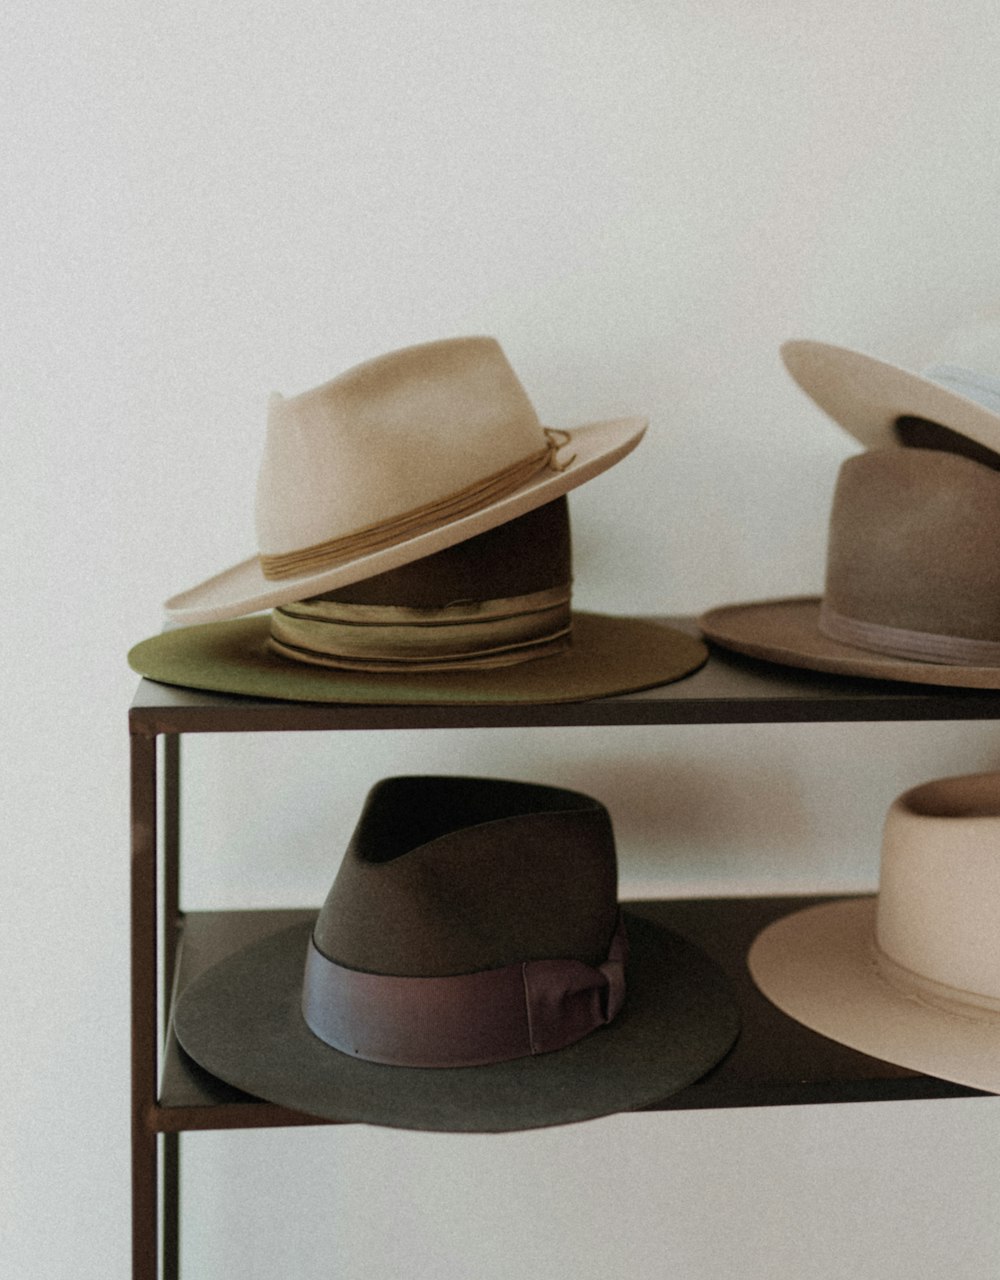 hats are lined up on a shelf against a white wall